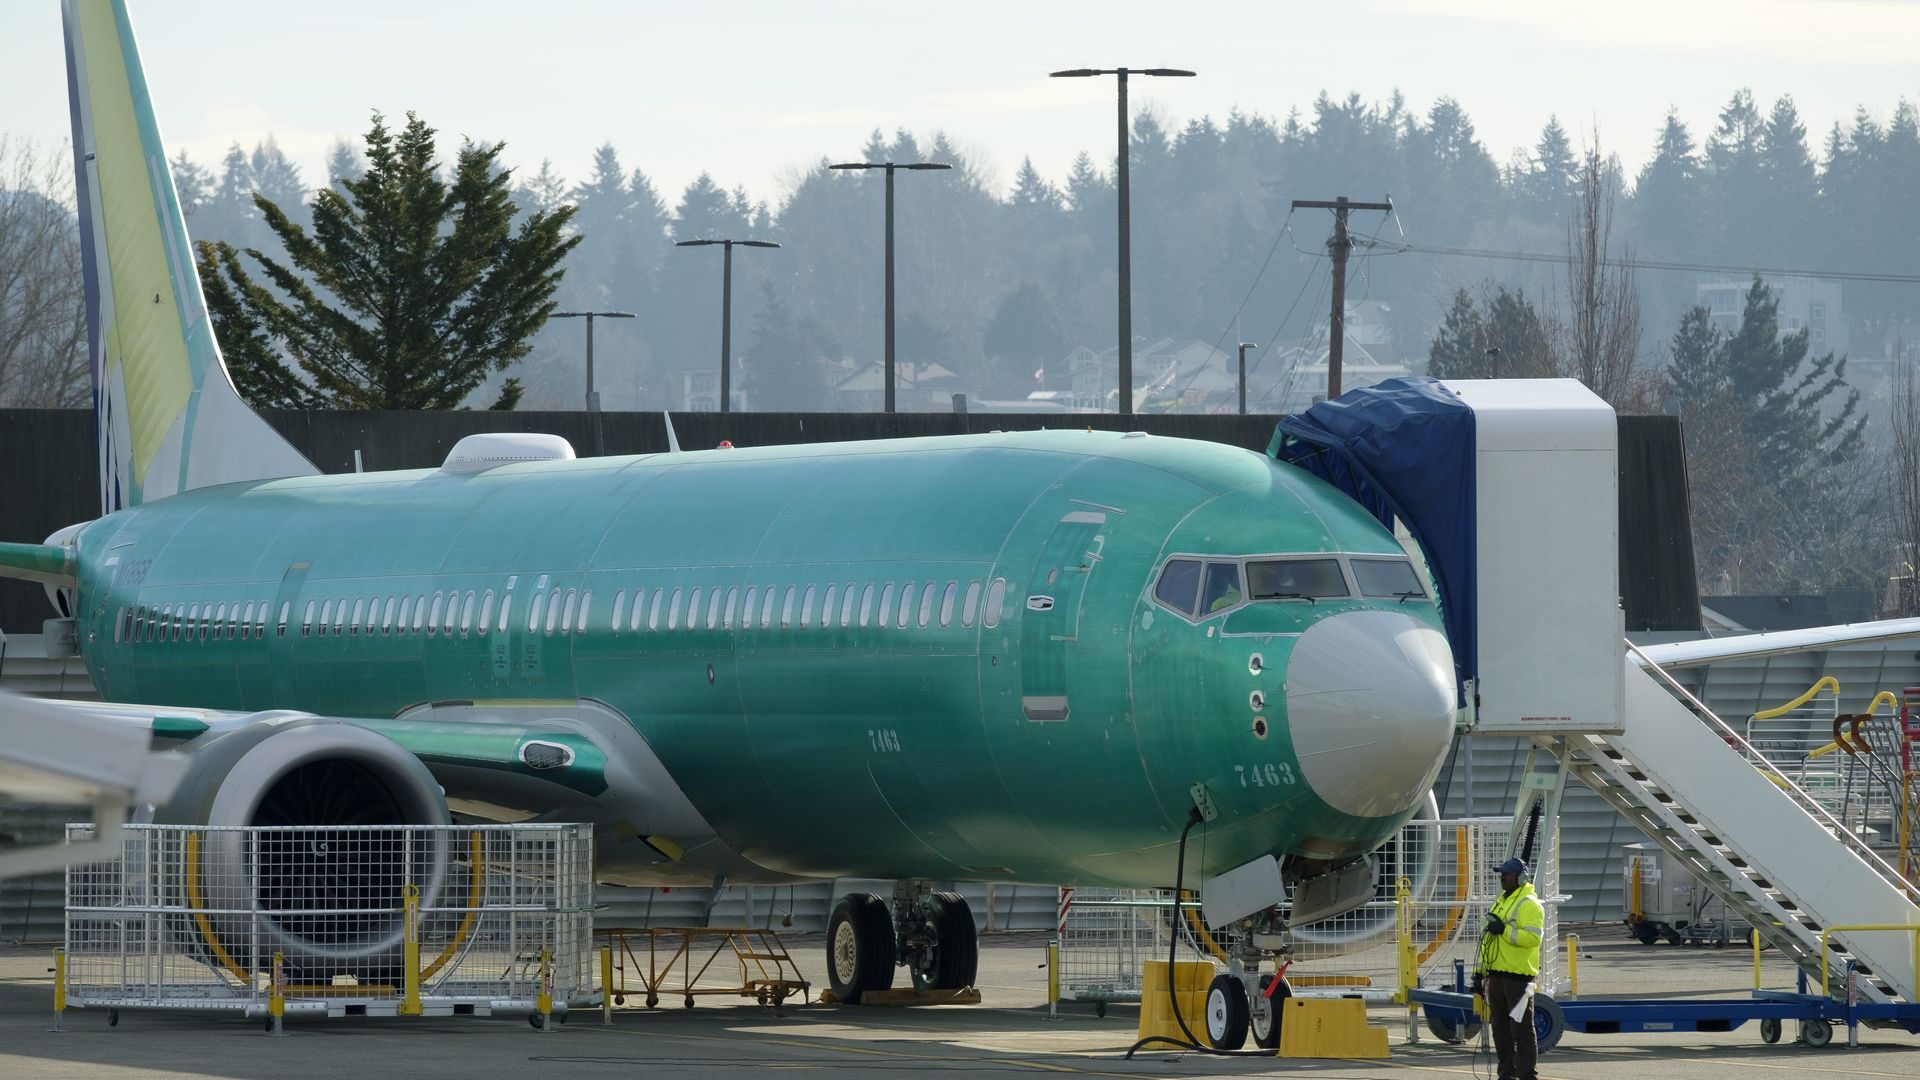 Boeing says improvements will be deployed across the entire Max 8 fleet in coming weeks.